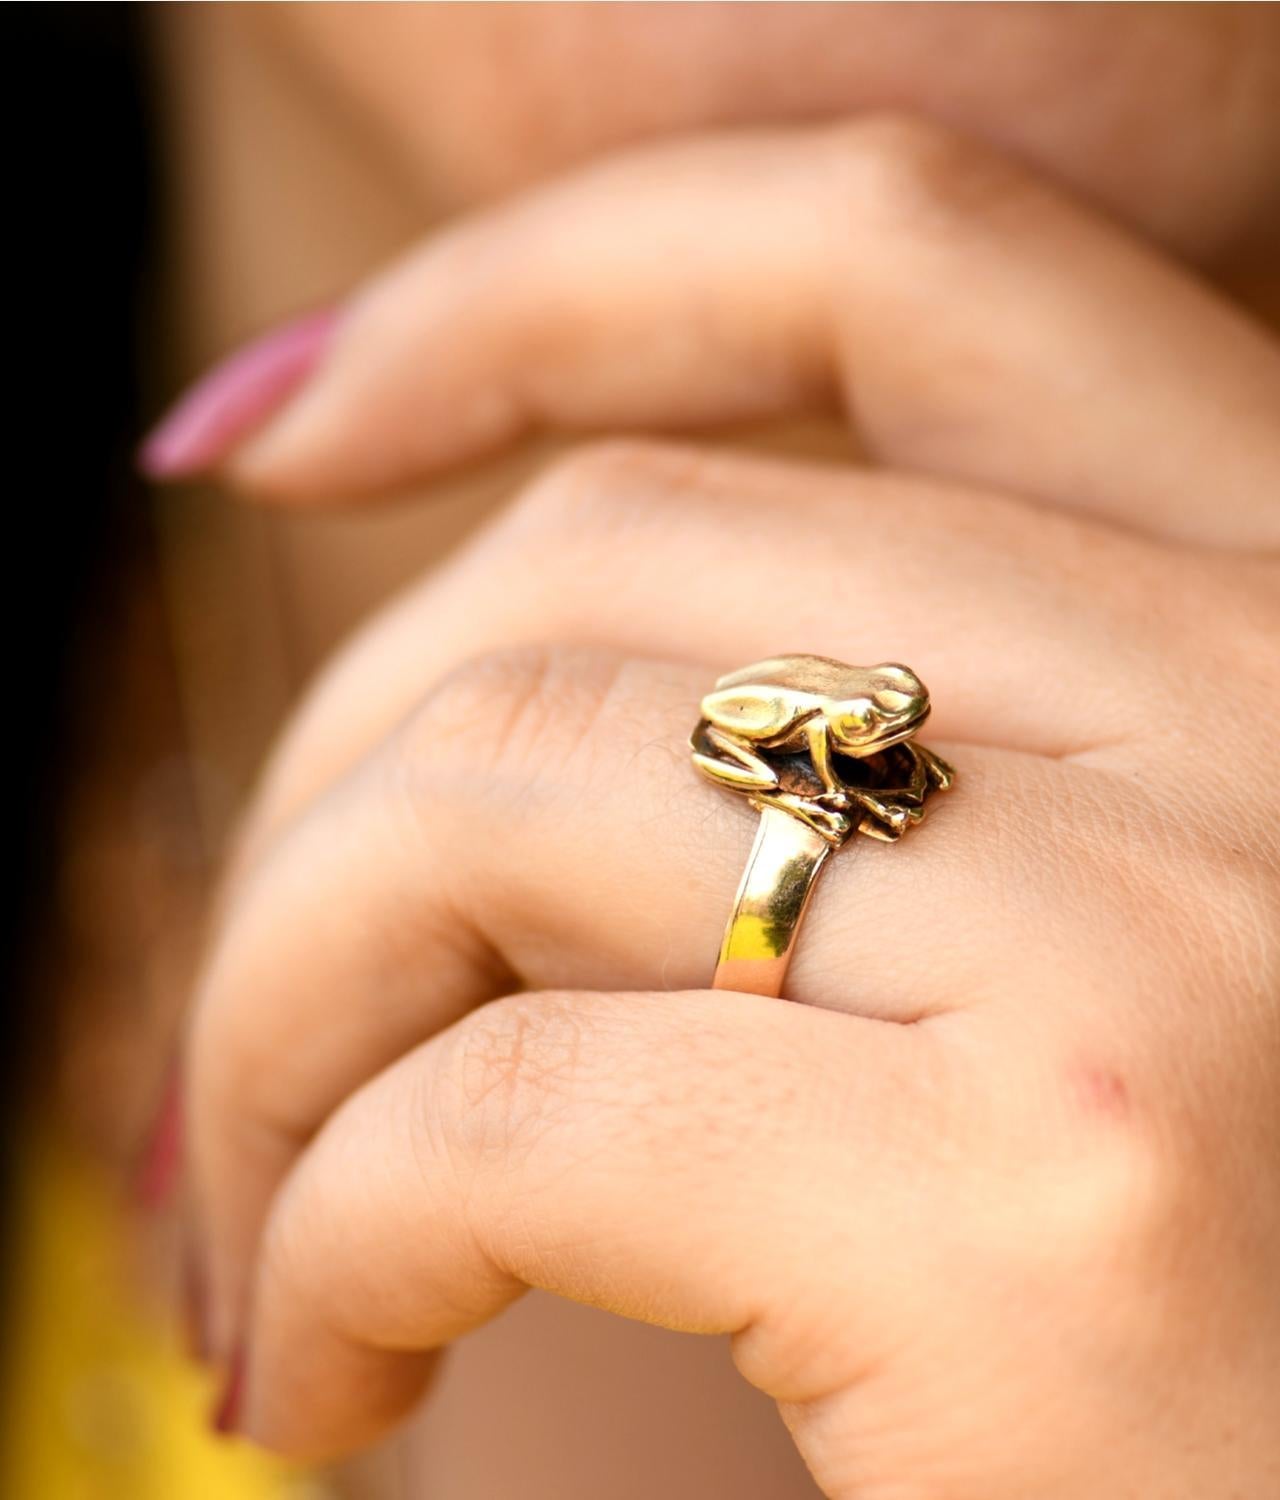 This ring has a very sweet, but life-like tree frog in 14 karat yellow gold. It is a simple design with the frog sitting directly on the band. It is sitting with its head looking up. The detail in the frog gives this ring real character. 

Gold frog